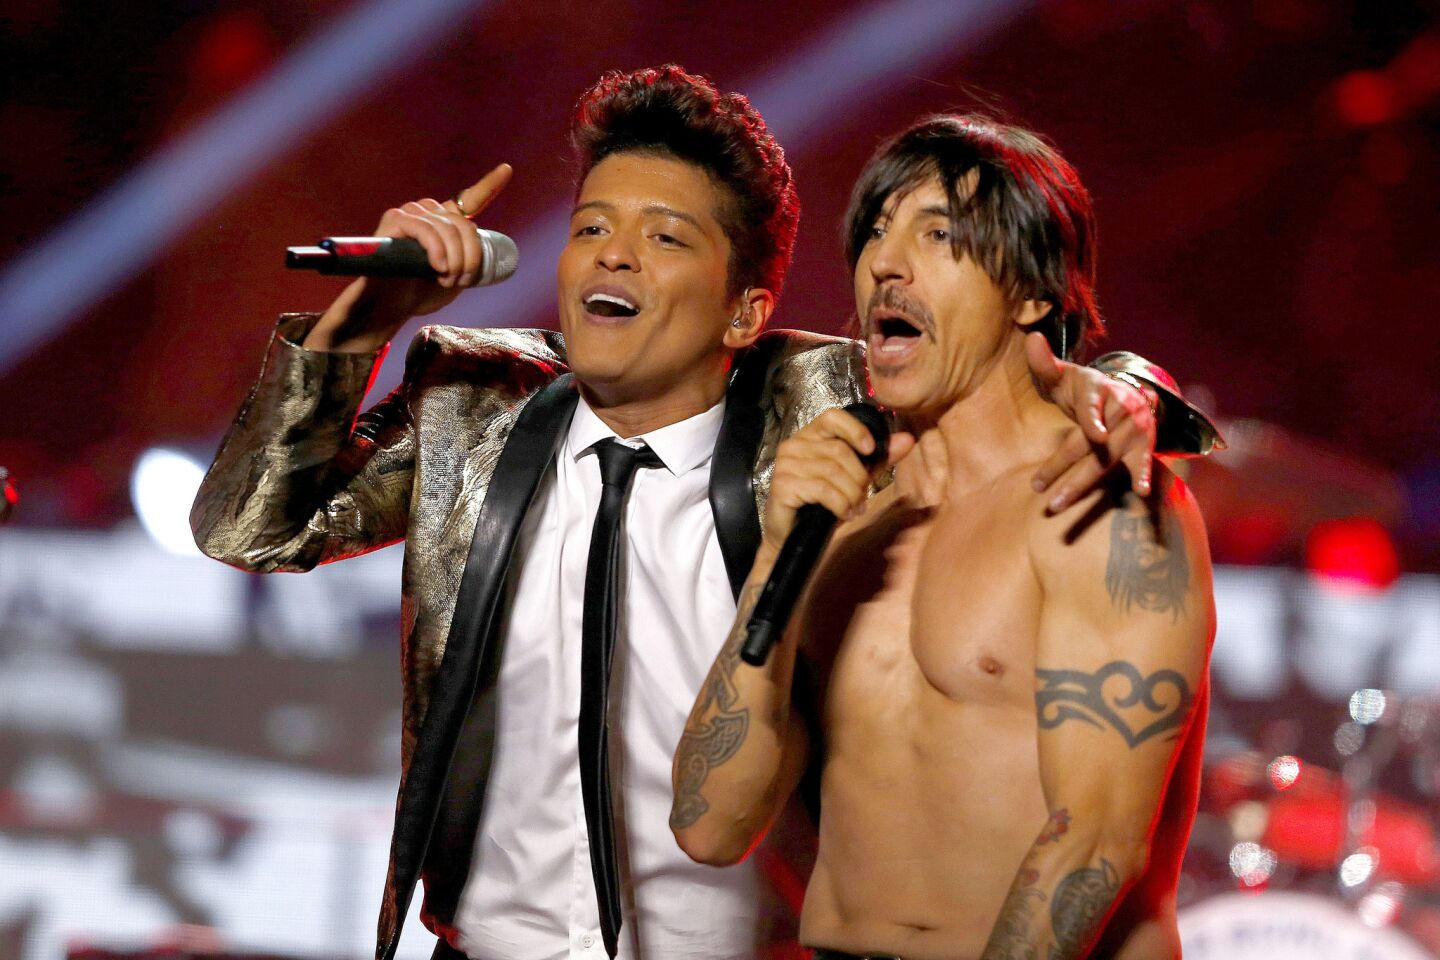 Bruno Mars featuring Red Hot Chili Peppers | 2014